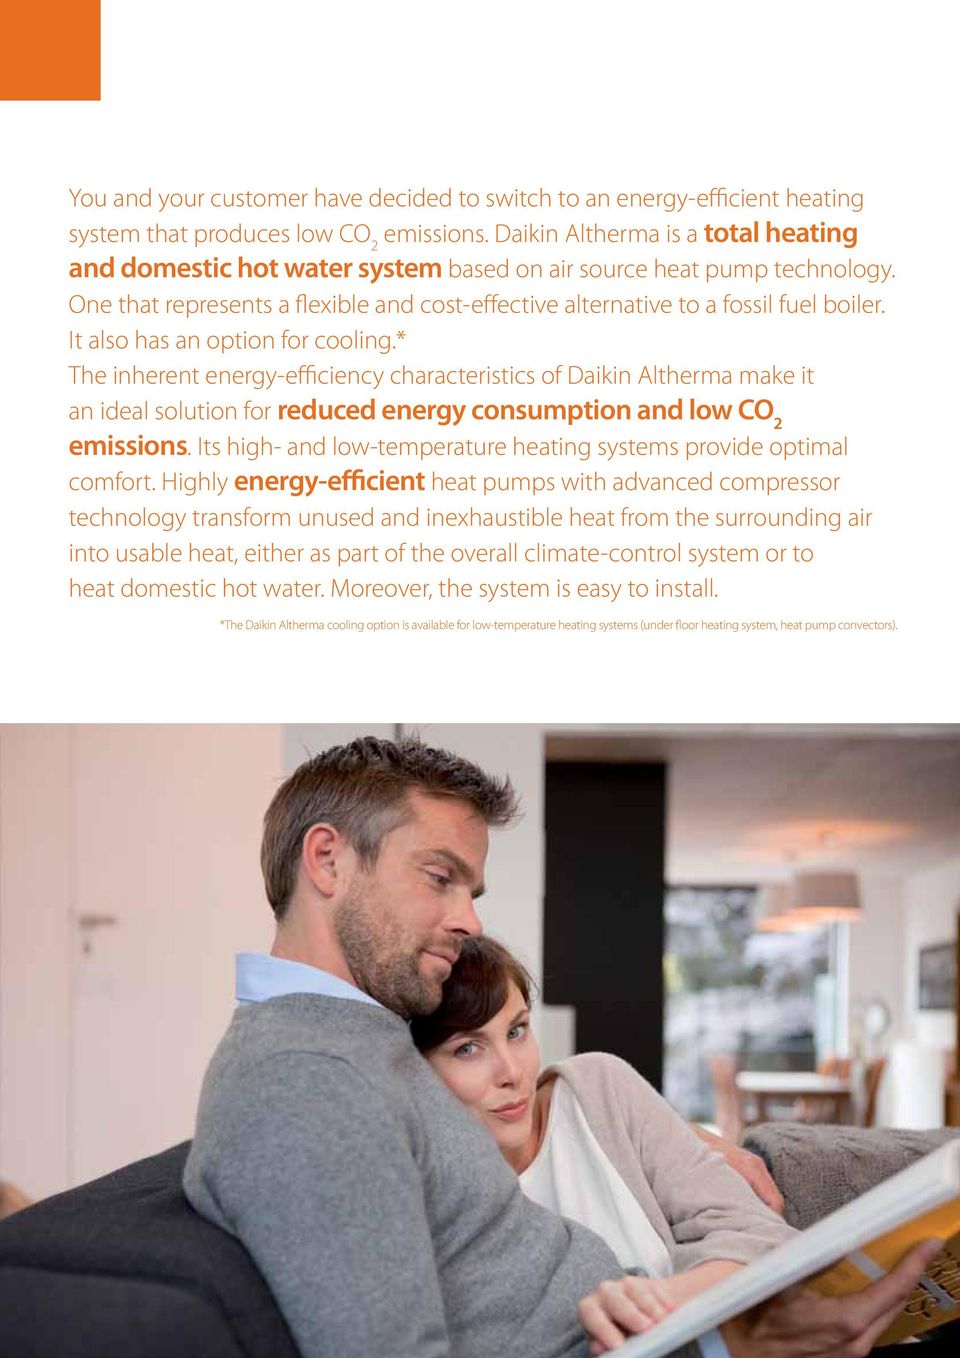 It also has an option for cooling.* The inherent energy-efficiency characteristics of Daikin Altherma make it an ideal solution for reduced energy consumption and low CO 2 emissions.